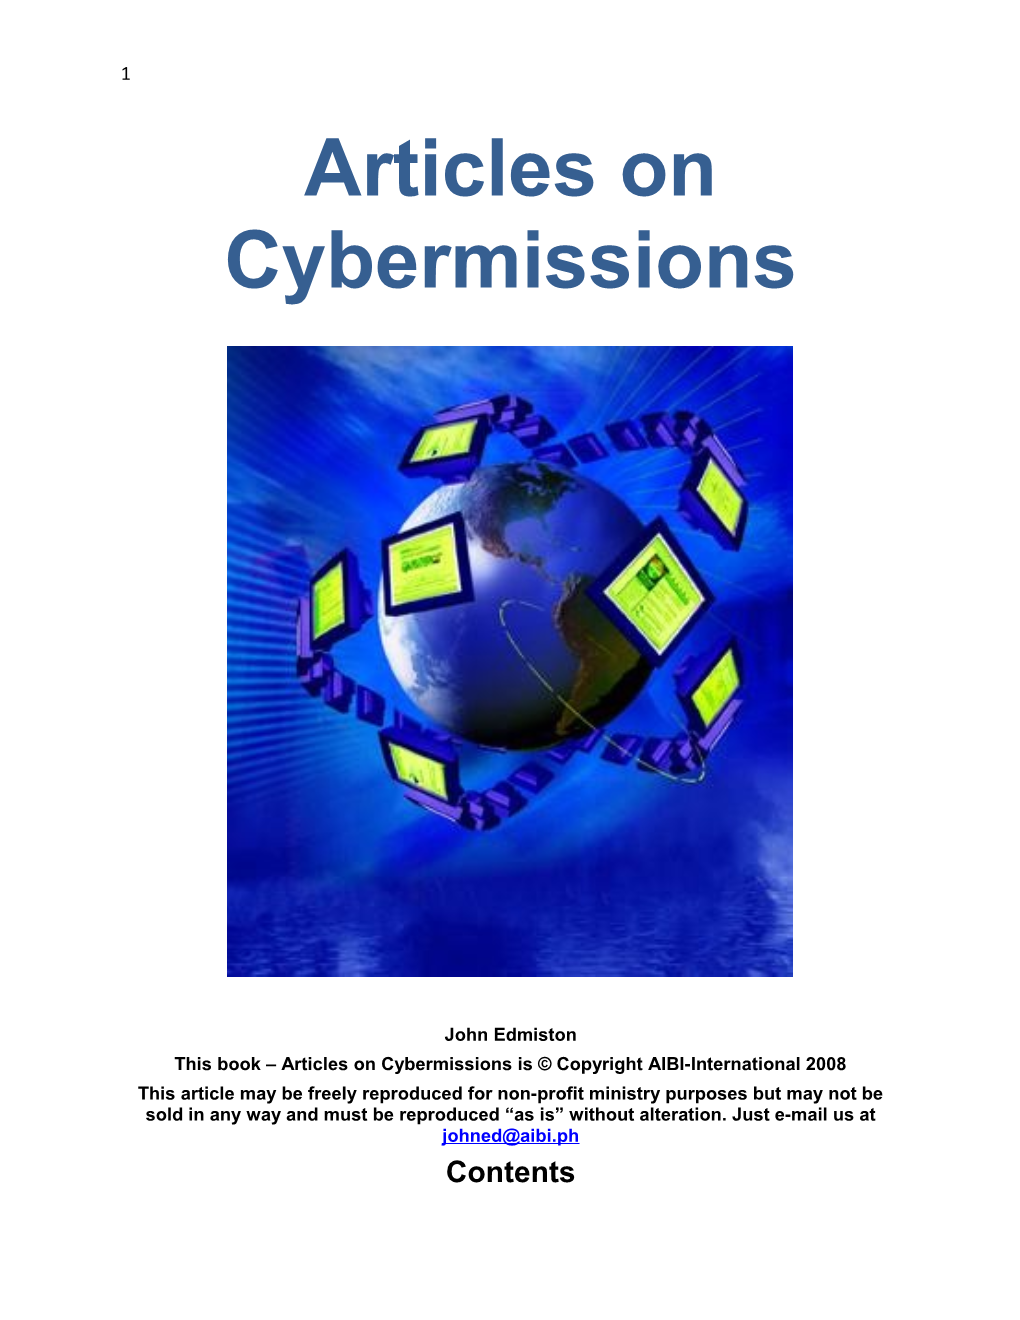 This Book Articles on Cybermissions Is Copyright AIBI-International 2008